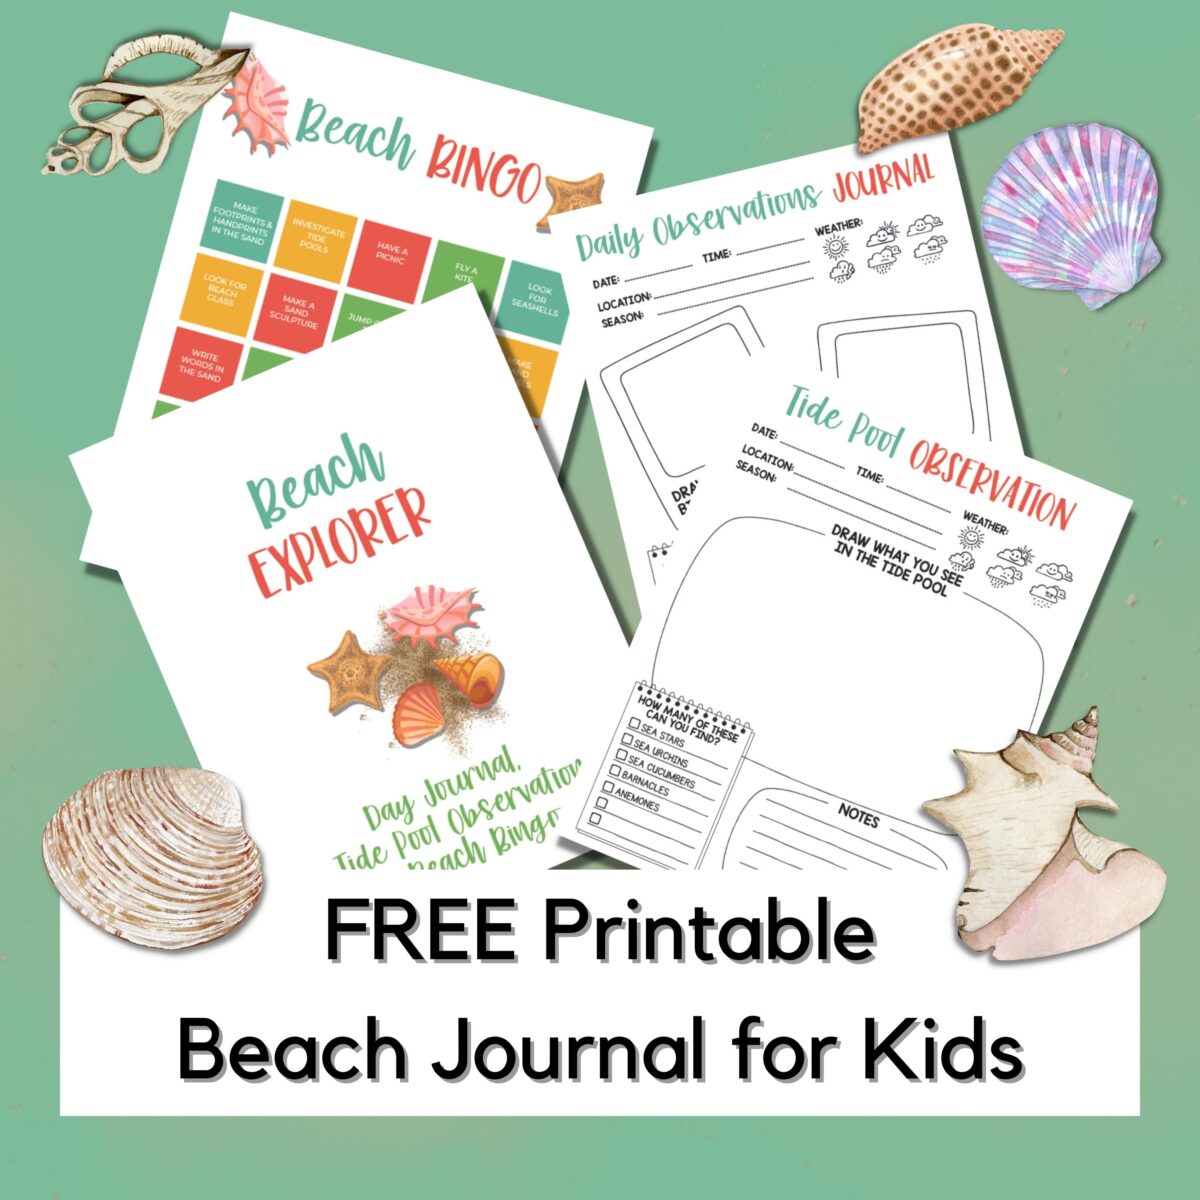 Summer Nature Study free printable for kids, including rock pool observation sheet, beach bingo of fun activities and a beach nature journal to complete daily.